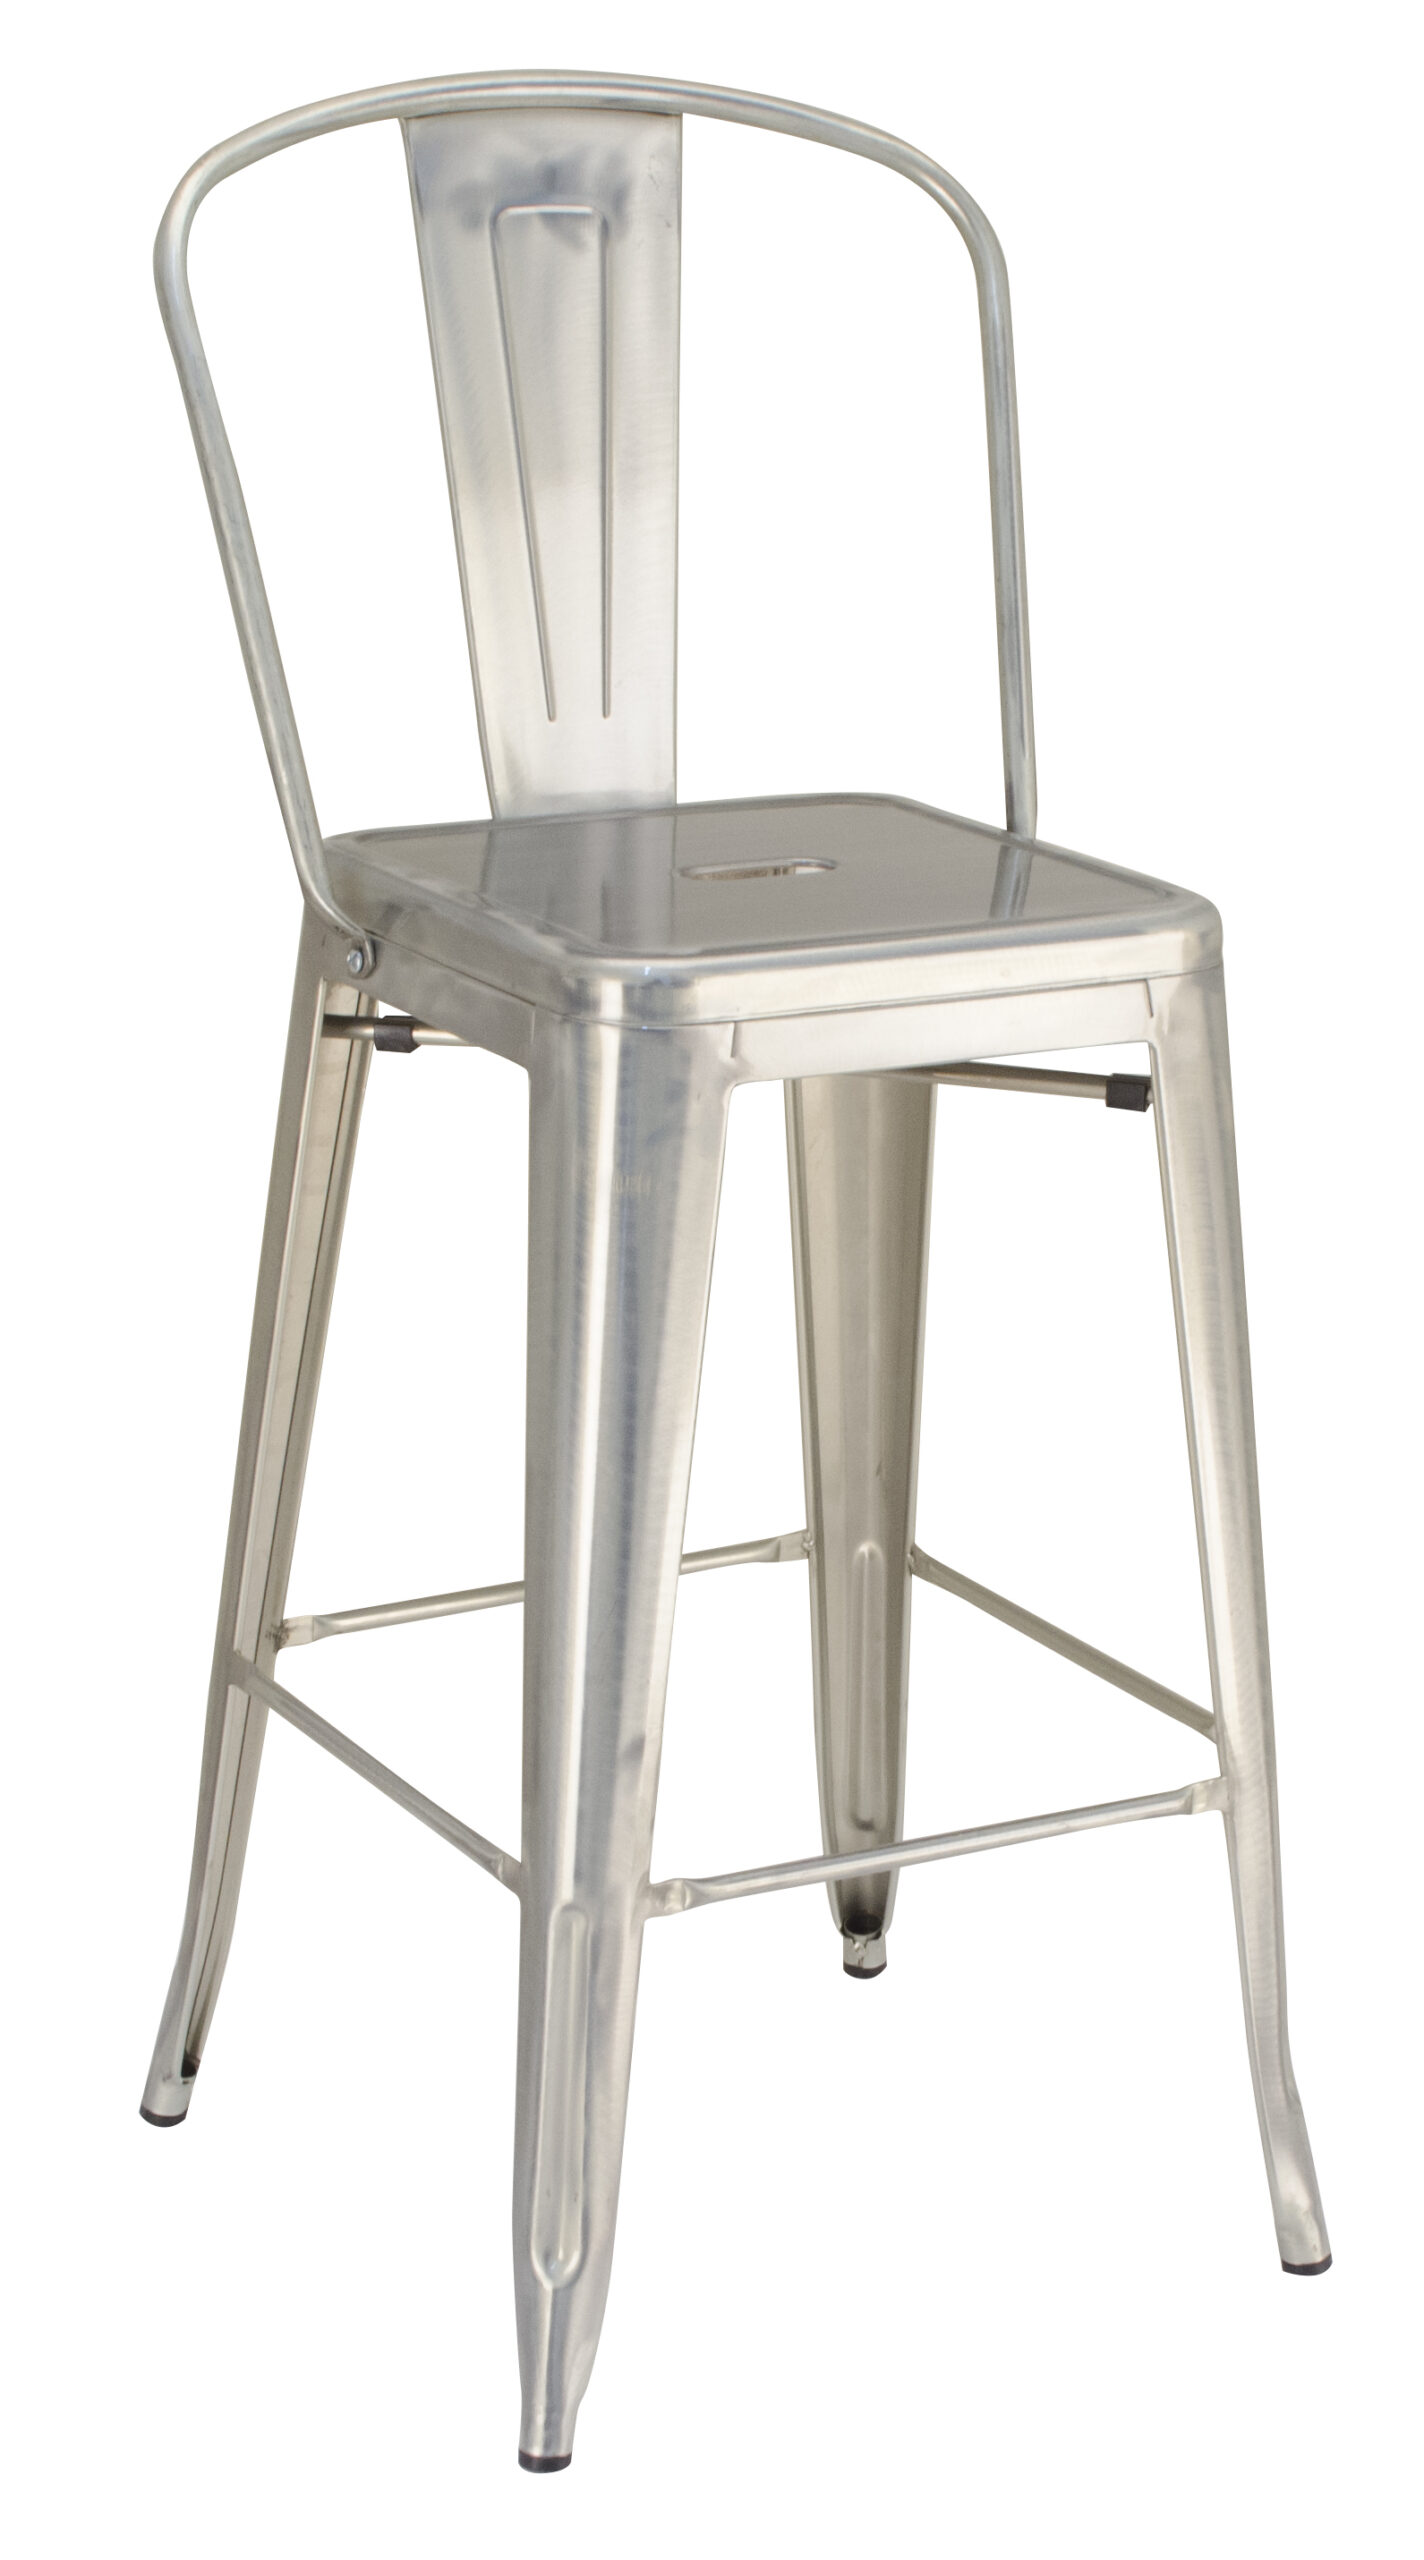 paris-metal-barstool-with-back-galvanized color picker choice 